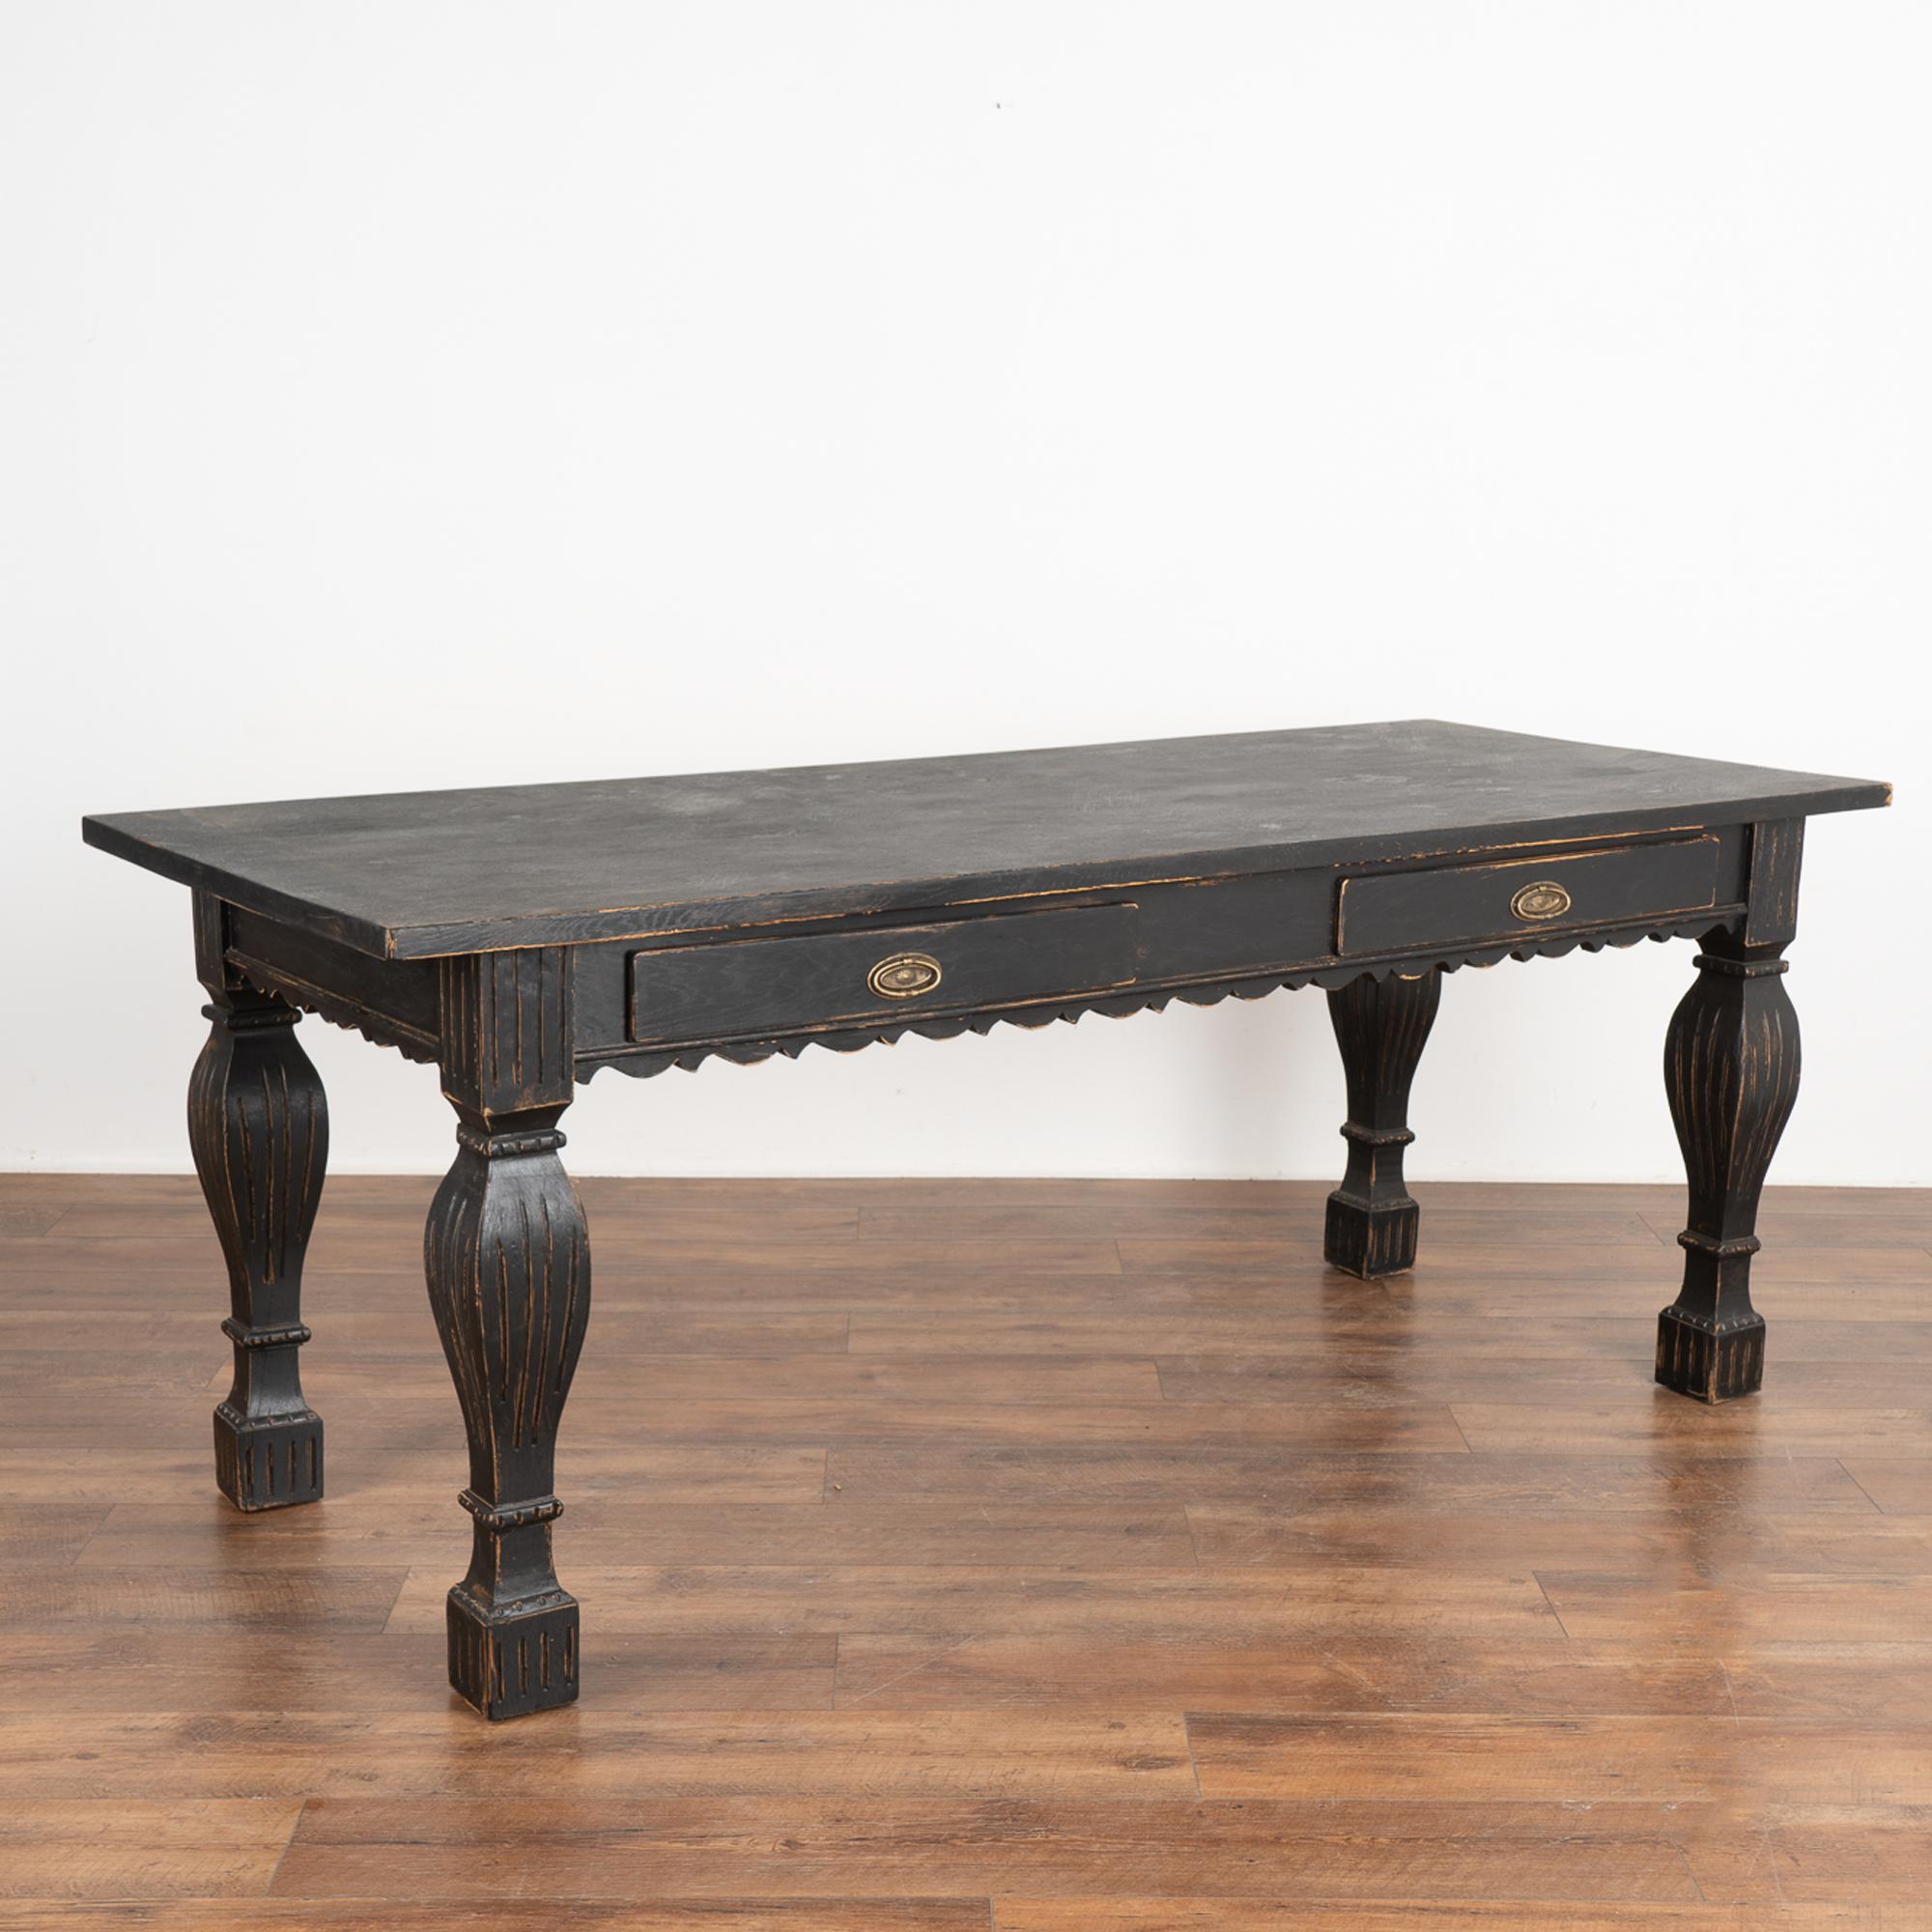 Antique baroque writing table from Denmark with two functioning drawers and scallop carved skirt.
The handsome legs with square base are made more dramatic with carved fluted trim.
Later custom painted, the black paint has been lightly distressed to